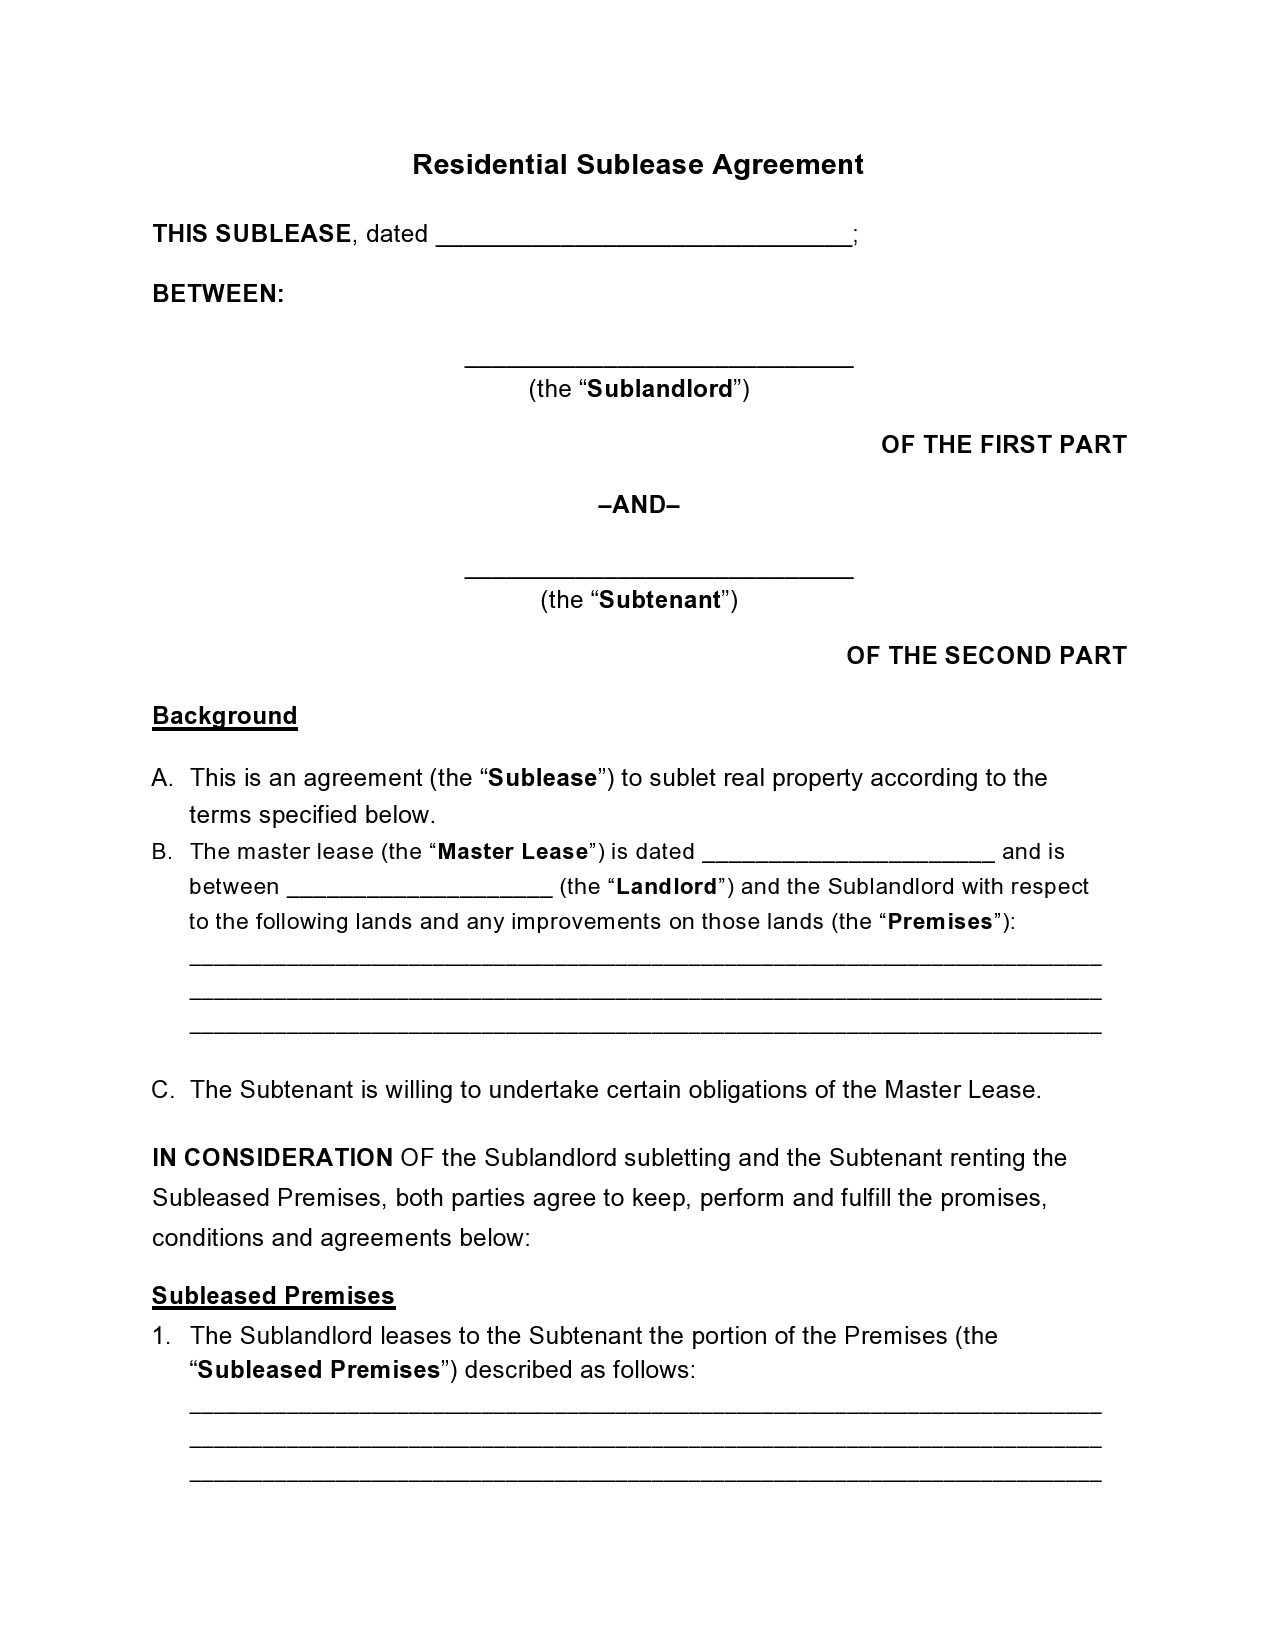 Free residential sublease agreement 02